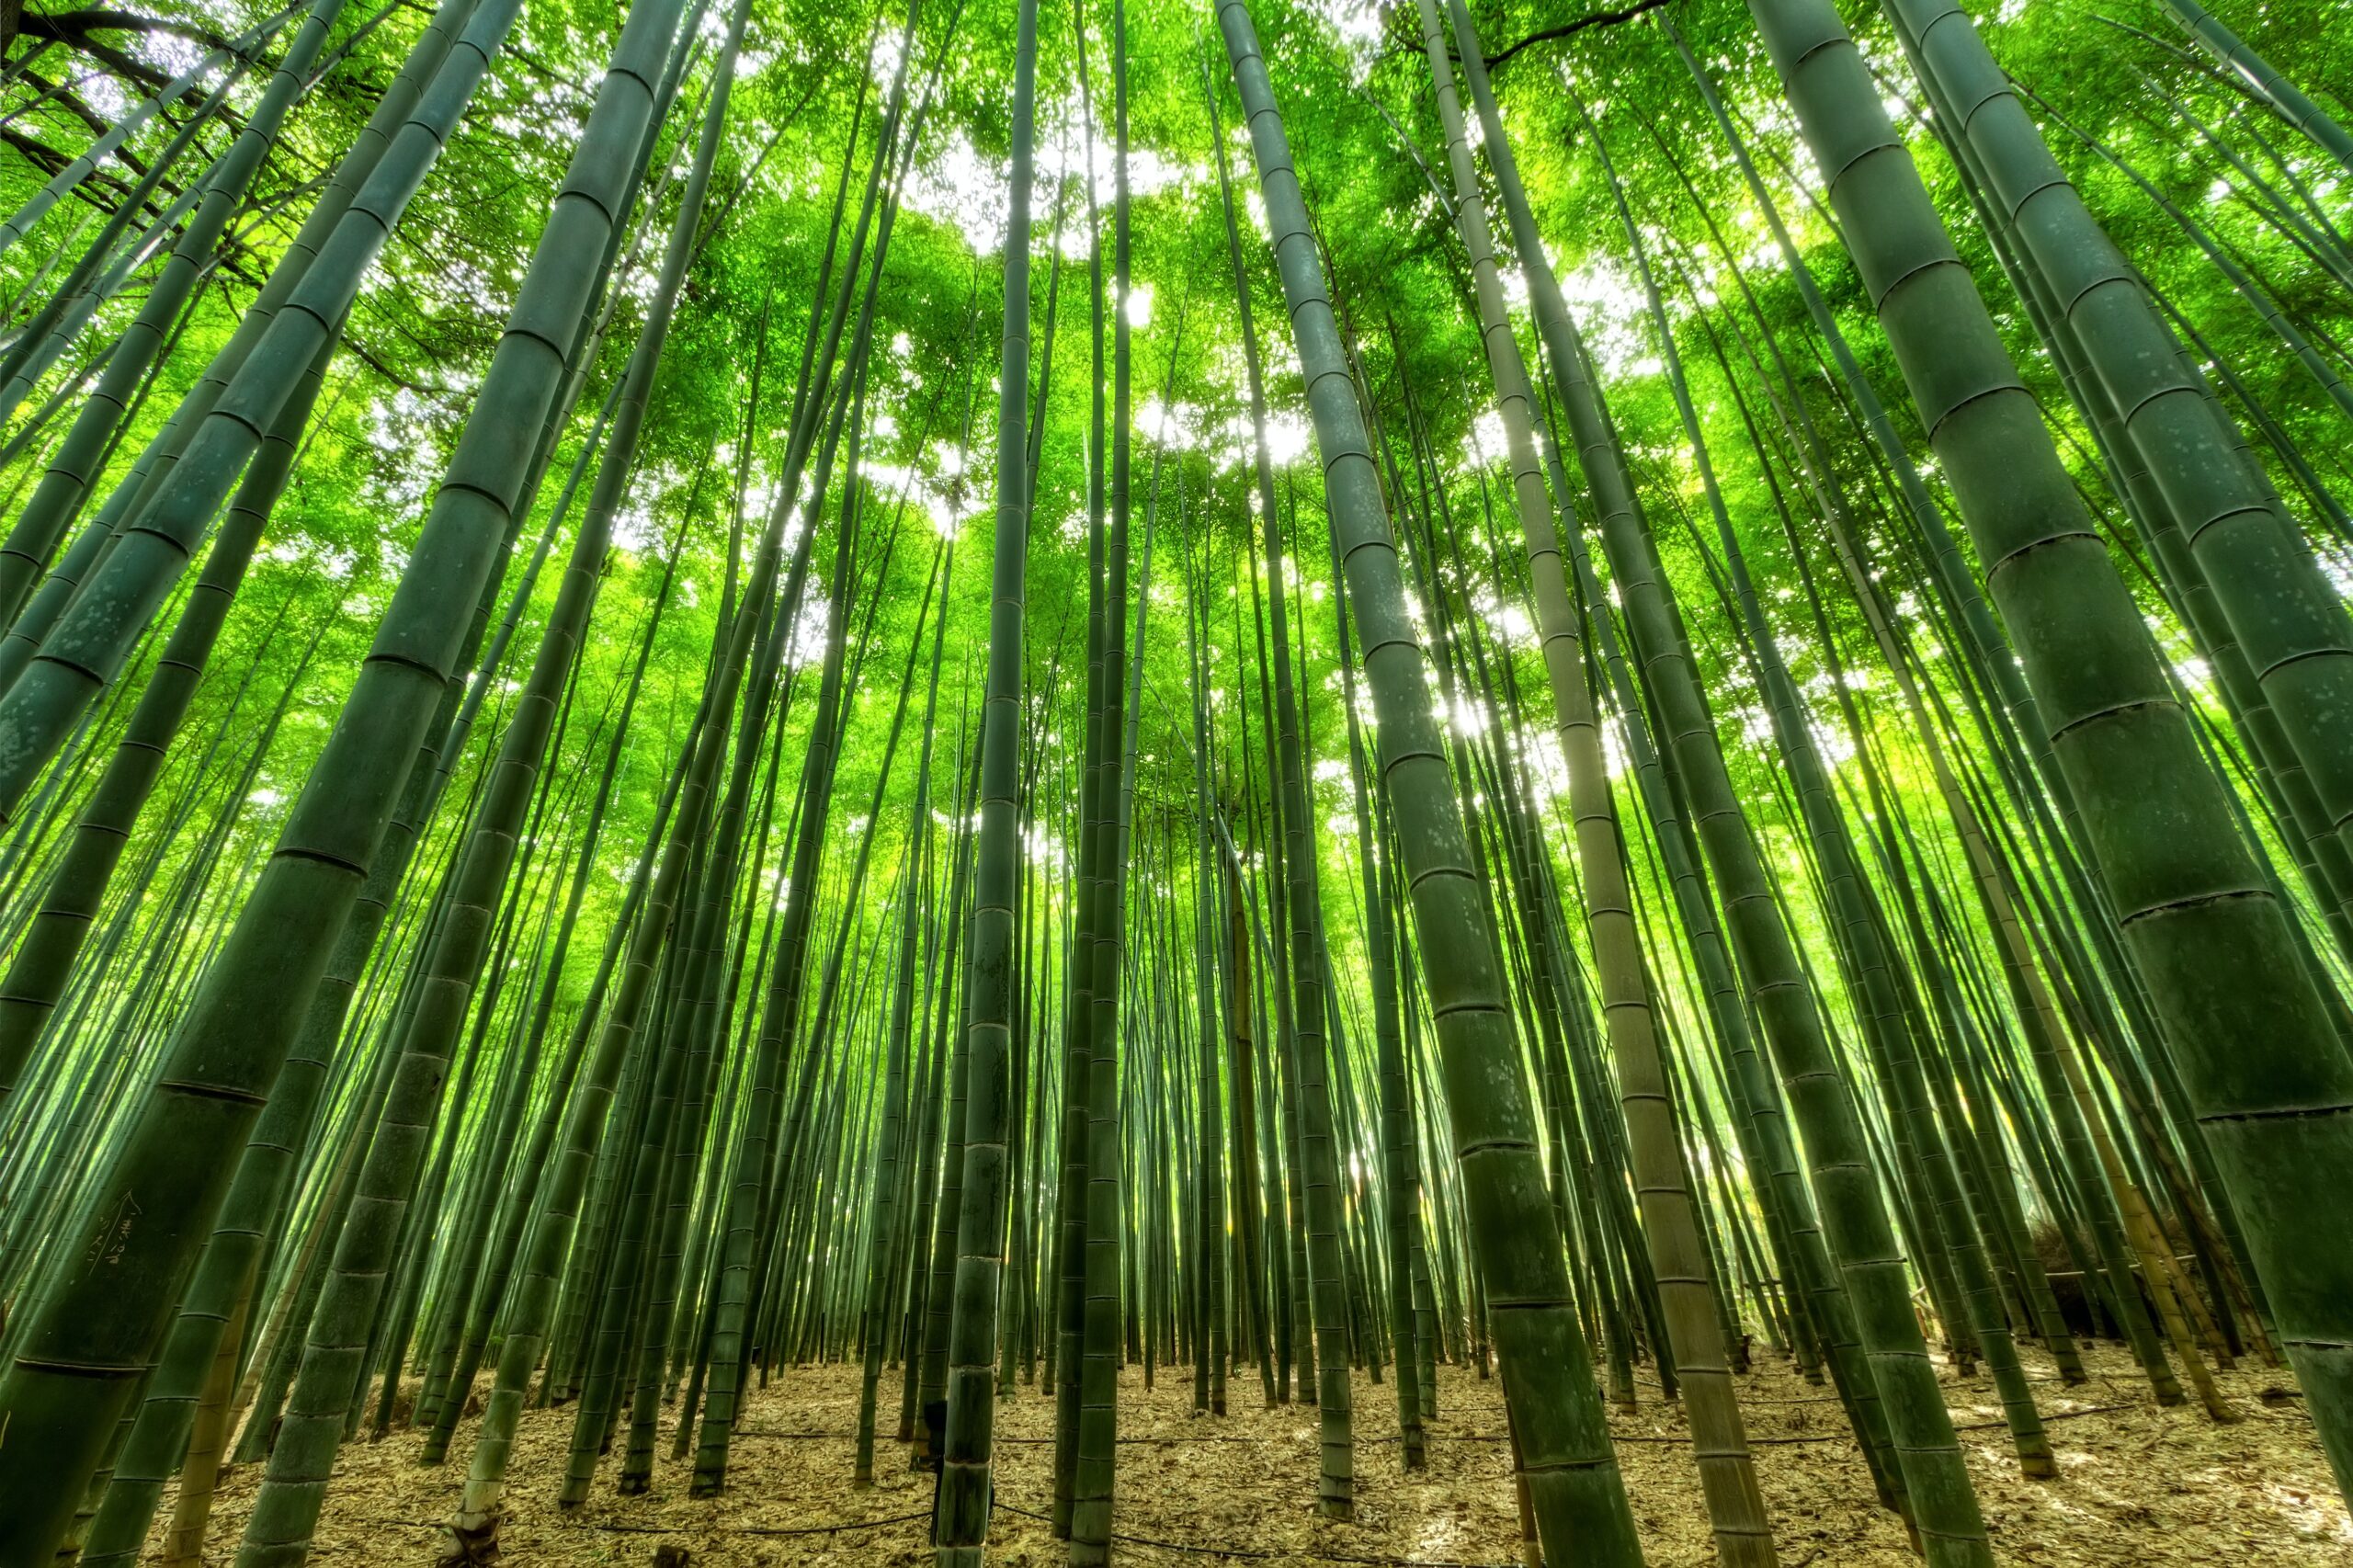 bamboo trees with leafy canopy Photo by Emre Orkun KESKIN from Pexels